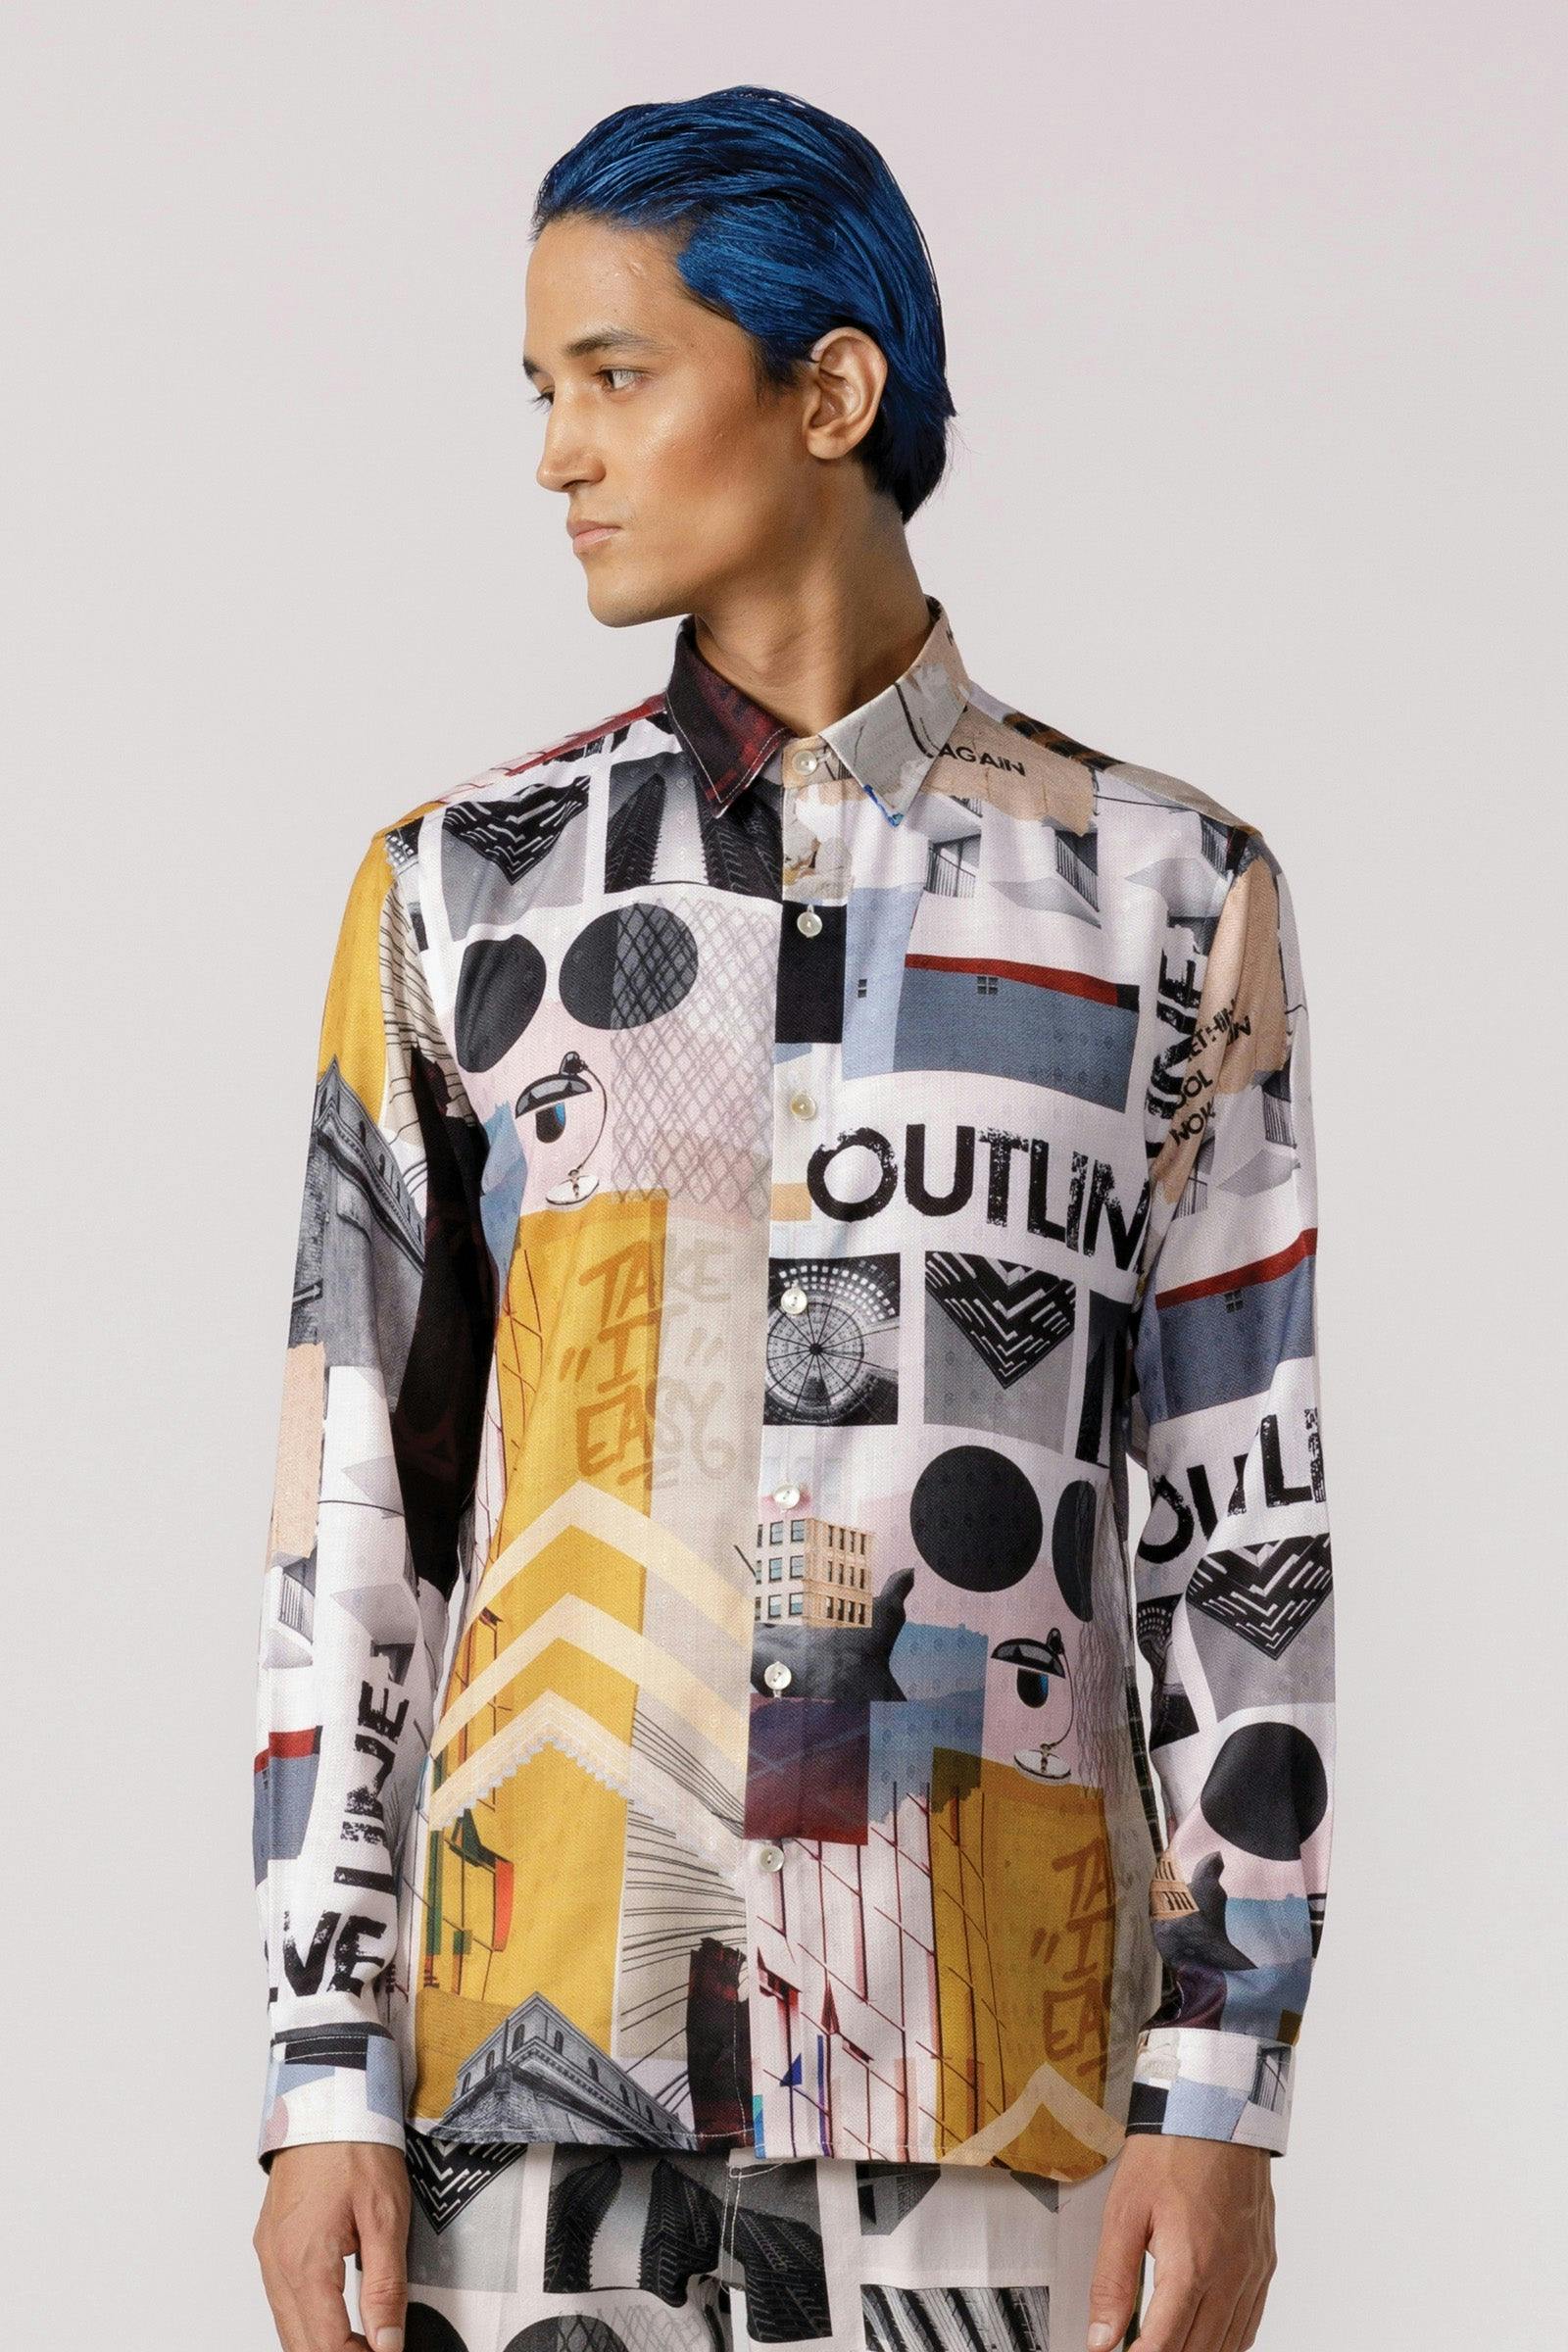 Bauhaus mosaic printed shirt, a product by Line Outline